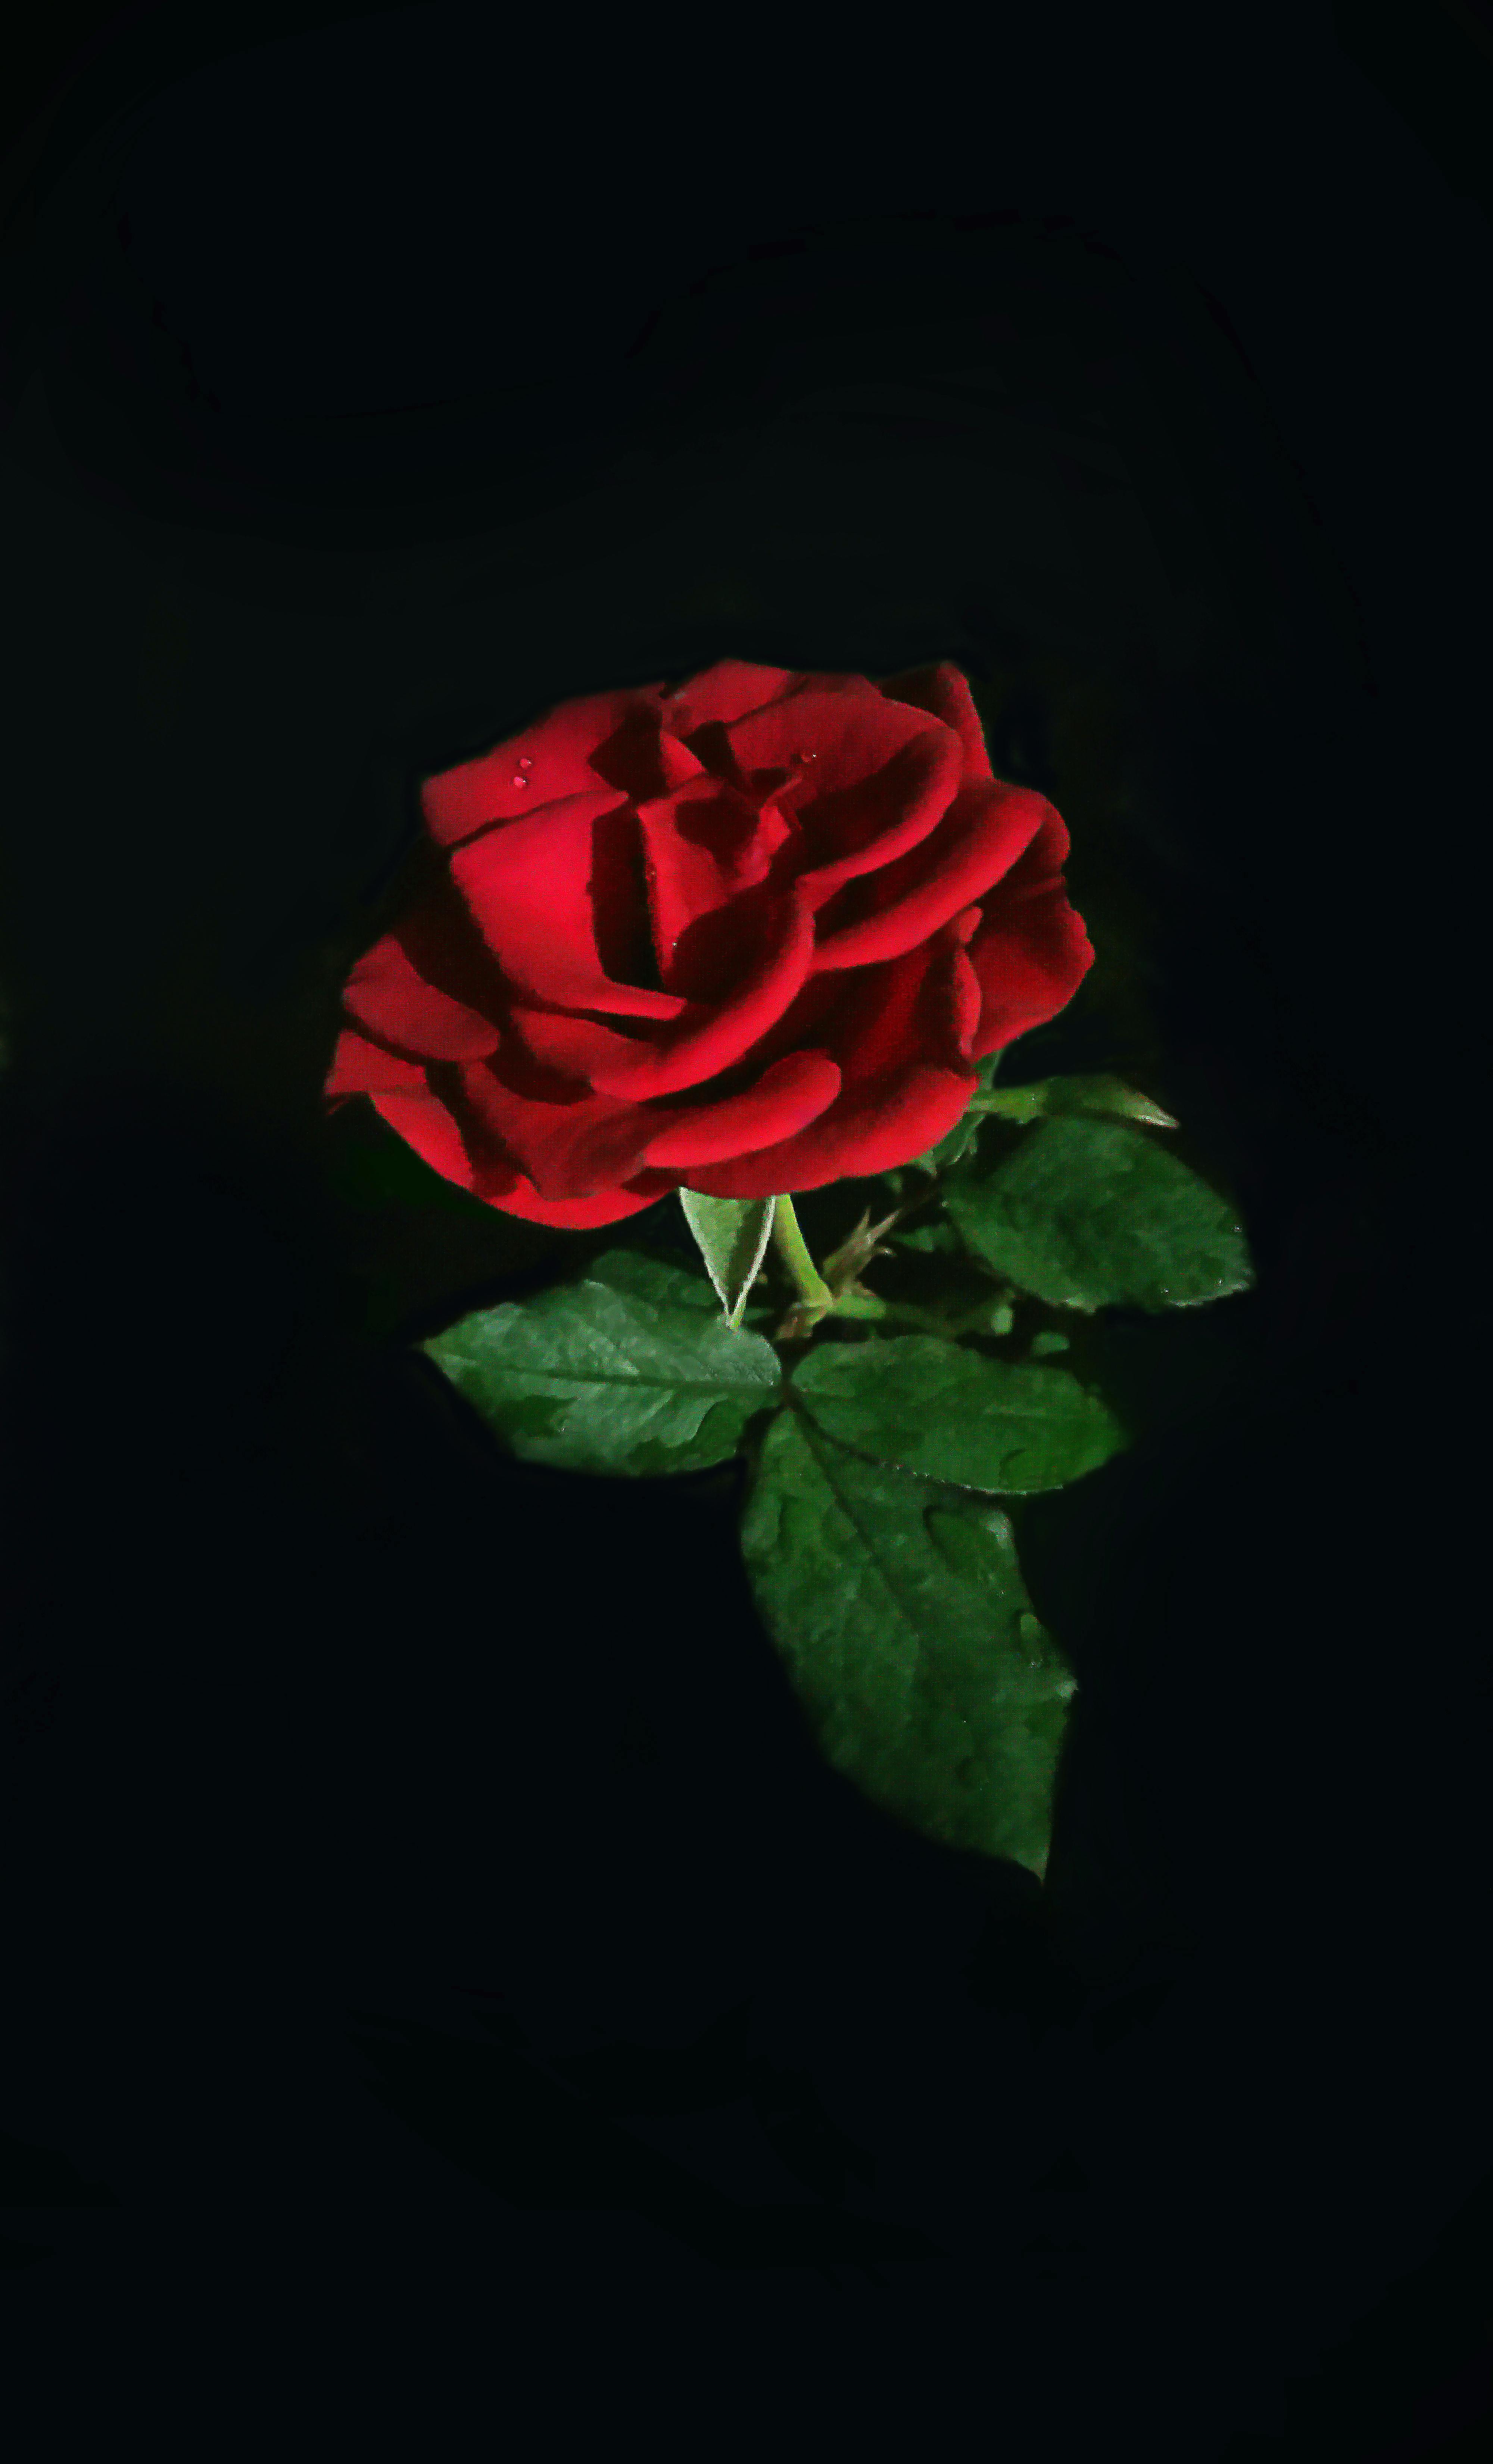 Free stock photo of darkness, Red Rose, rose leaf